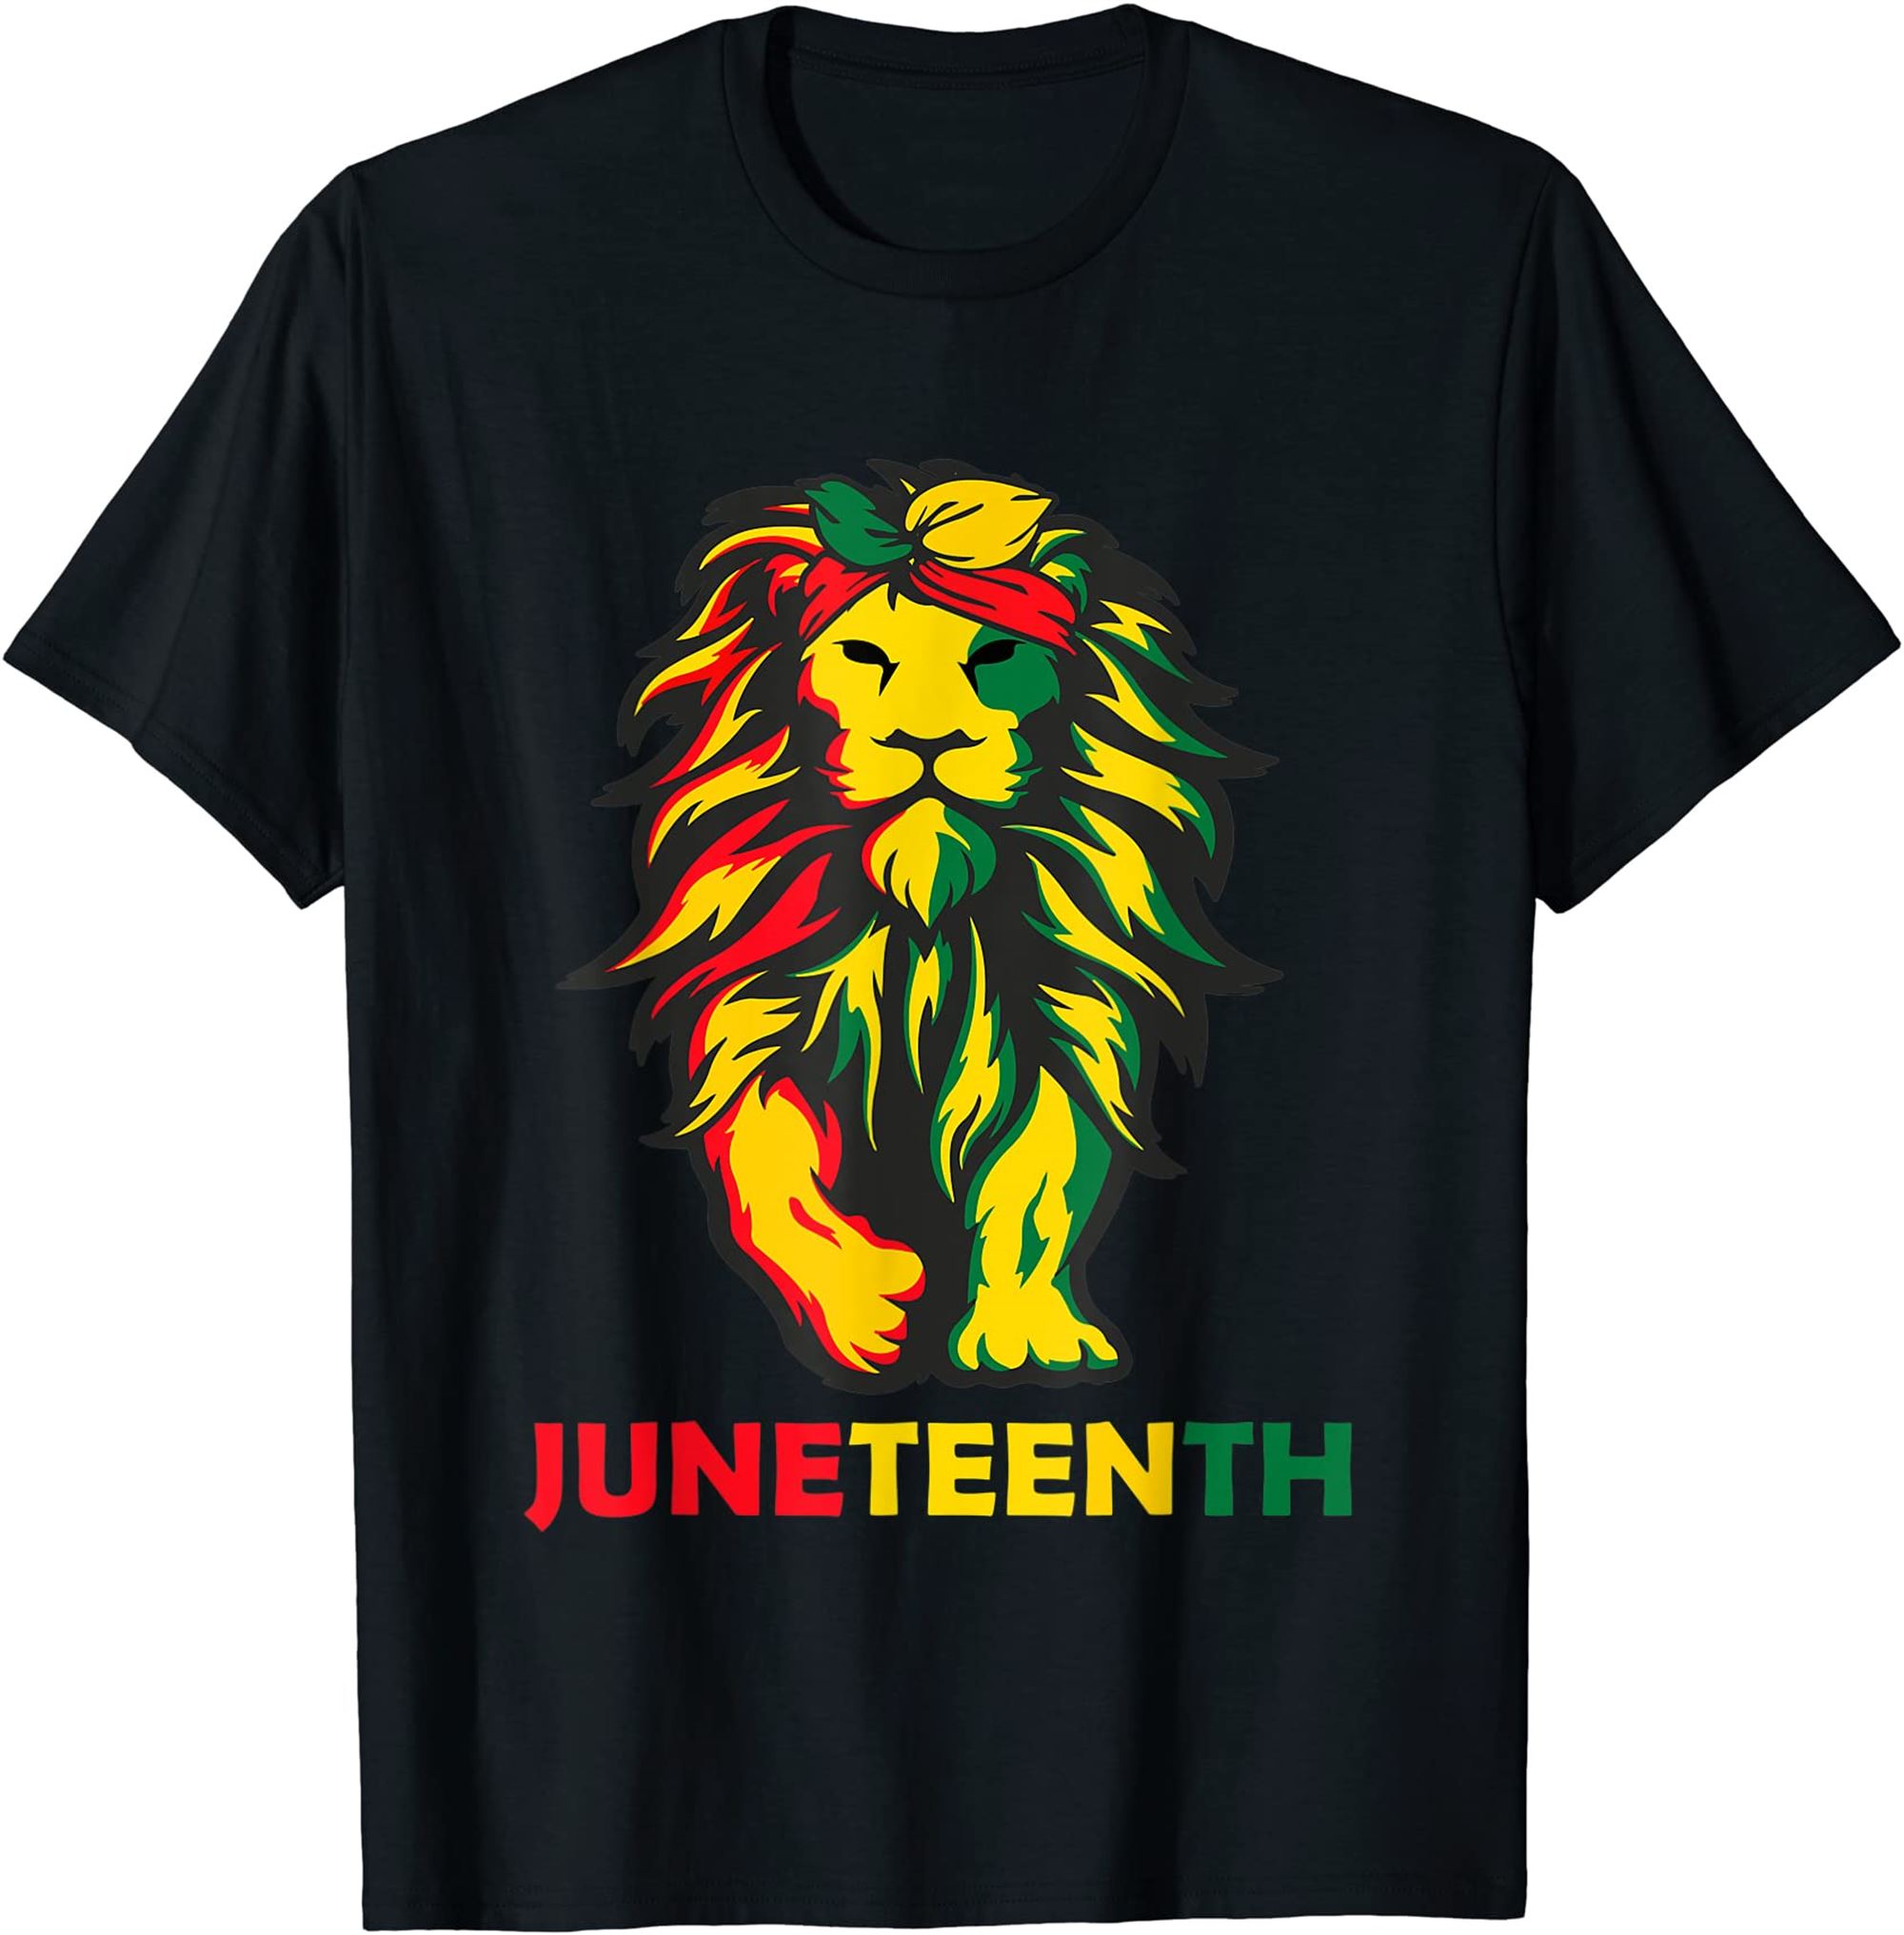 Lion Juneteenth Cool Black History African American Flag T-shirt Plus Size Up To 5xl